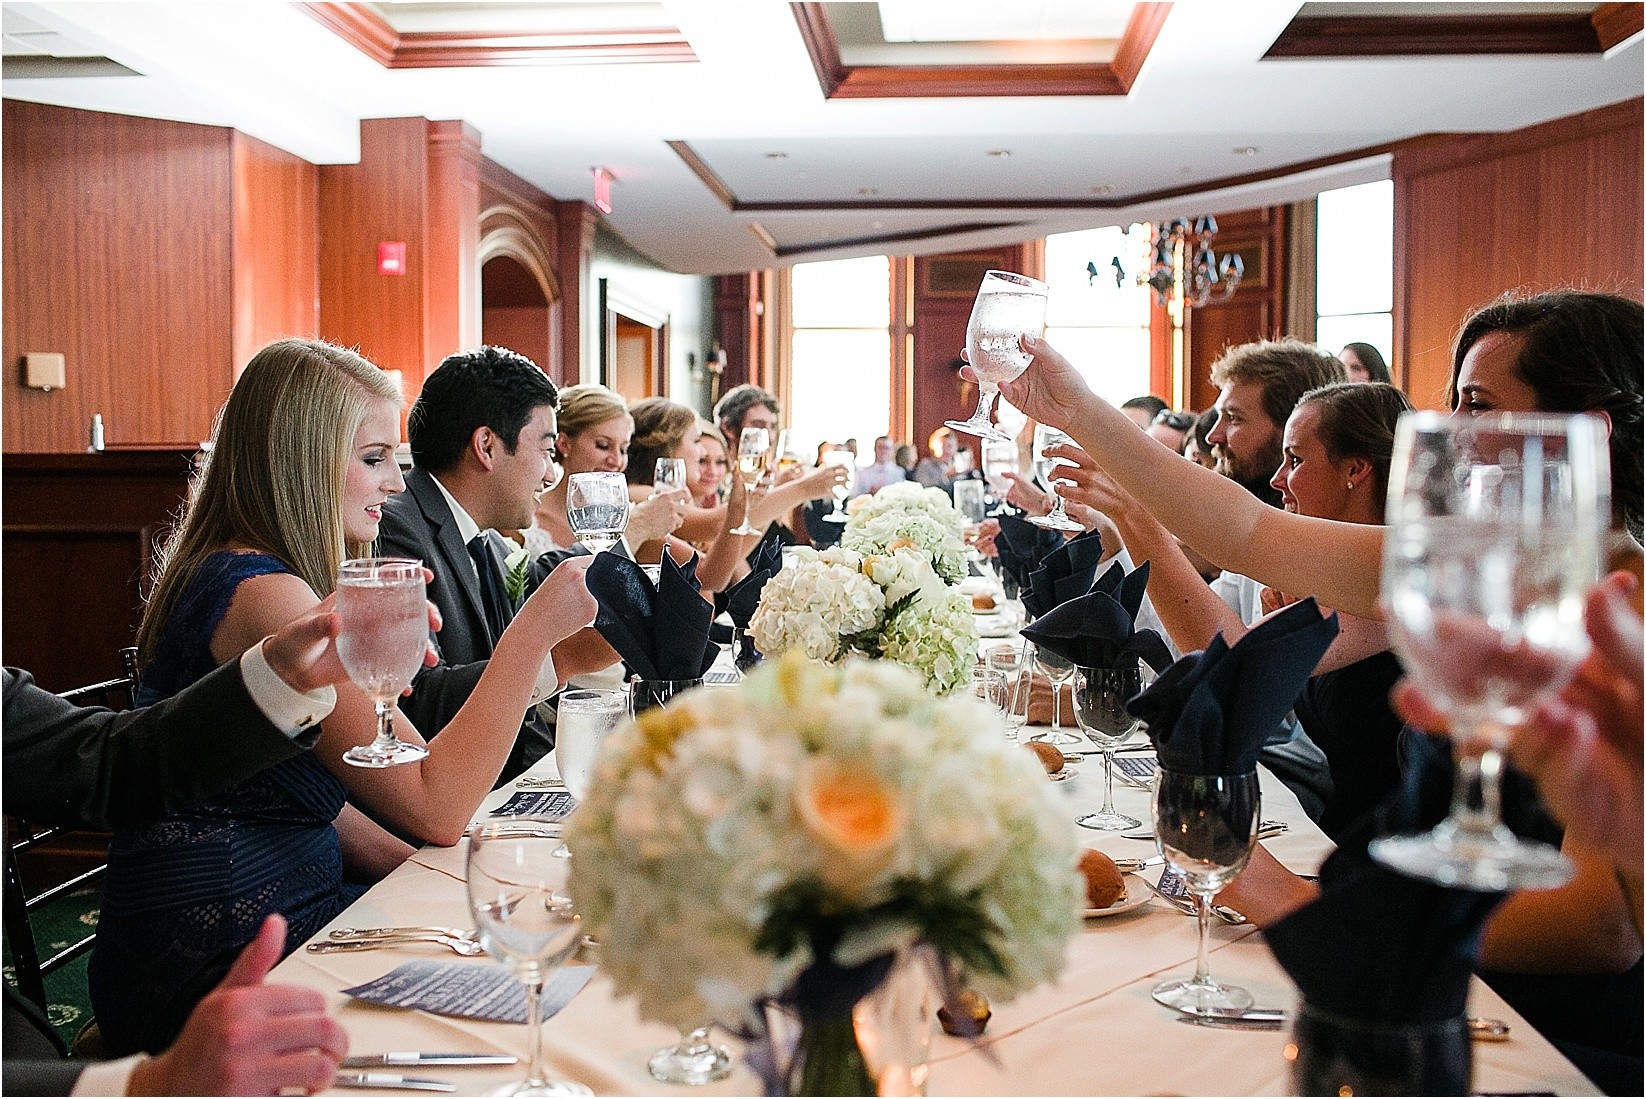 Toasting to the couple at the Charlotte City Club wedding in charlotte North Carolina